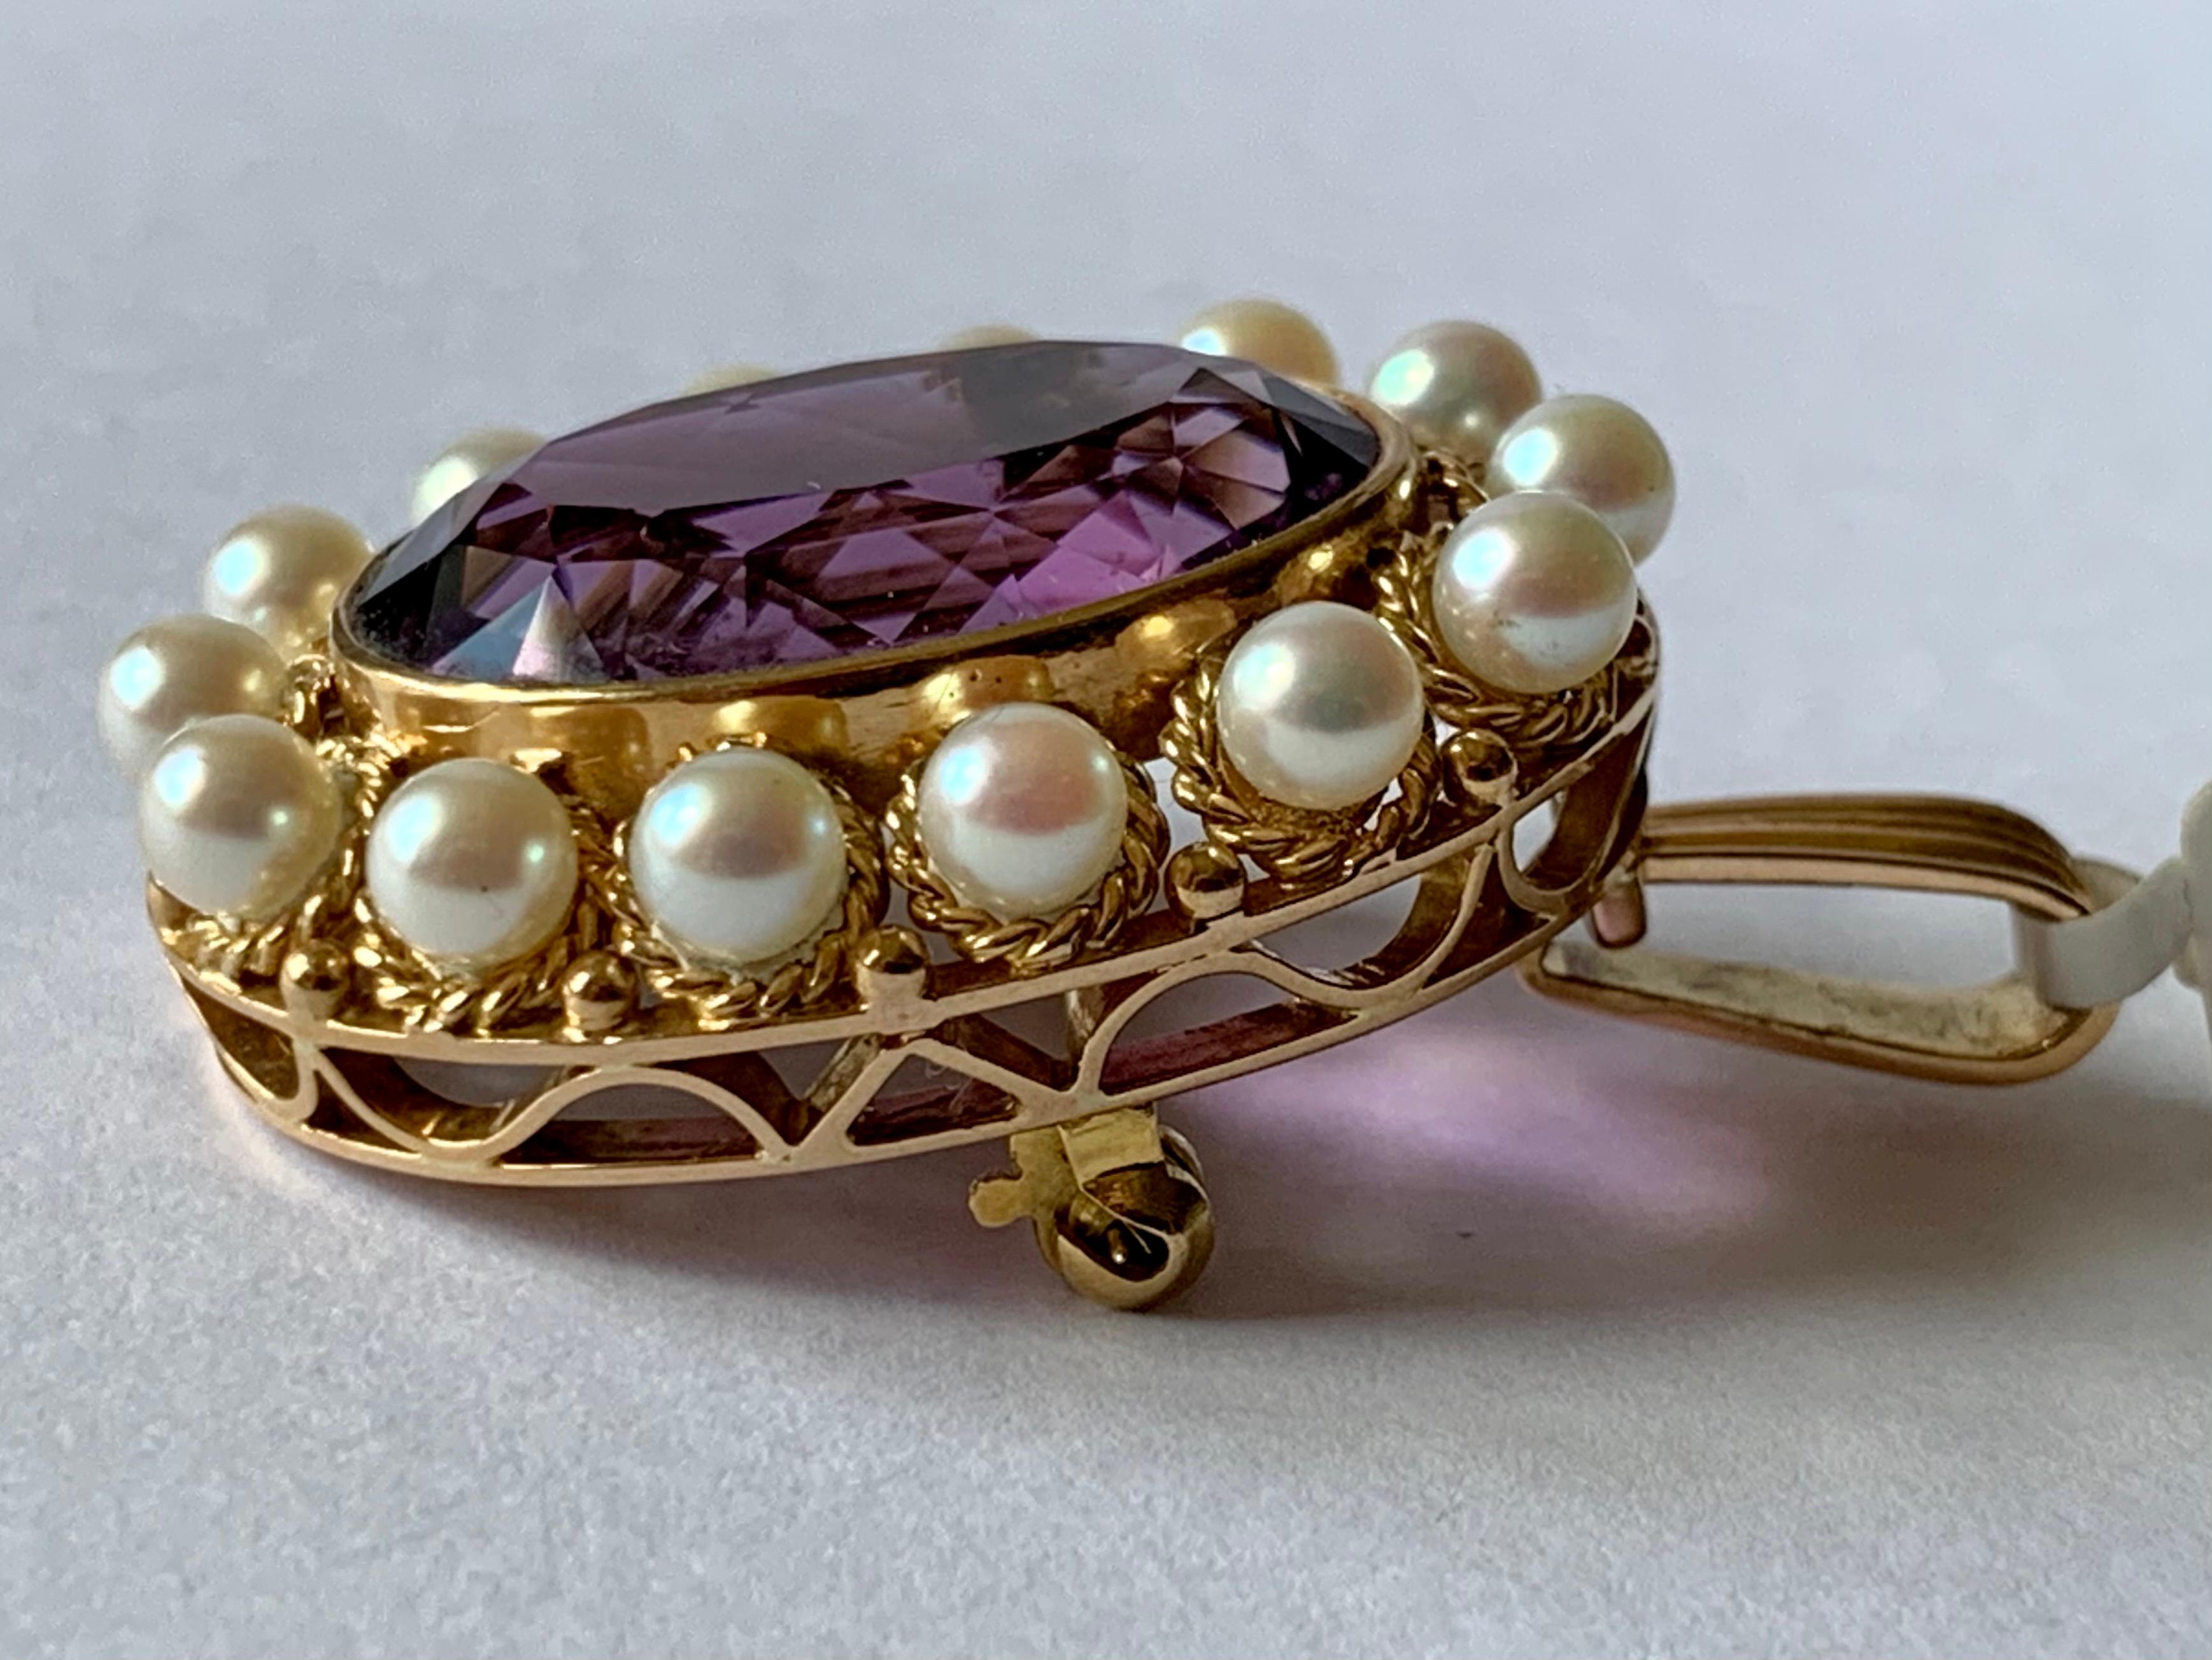 Vintage 18 K Yellow Gold Victorian Inspired Brooch/Pendant Amethyst and Pearls For Sale 1